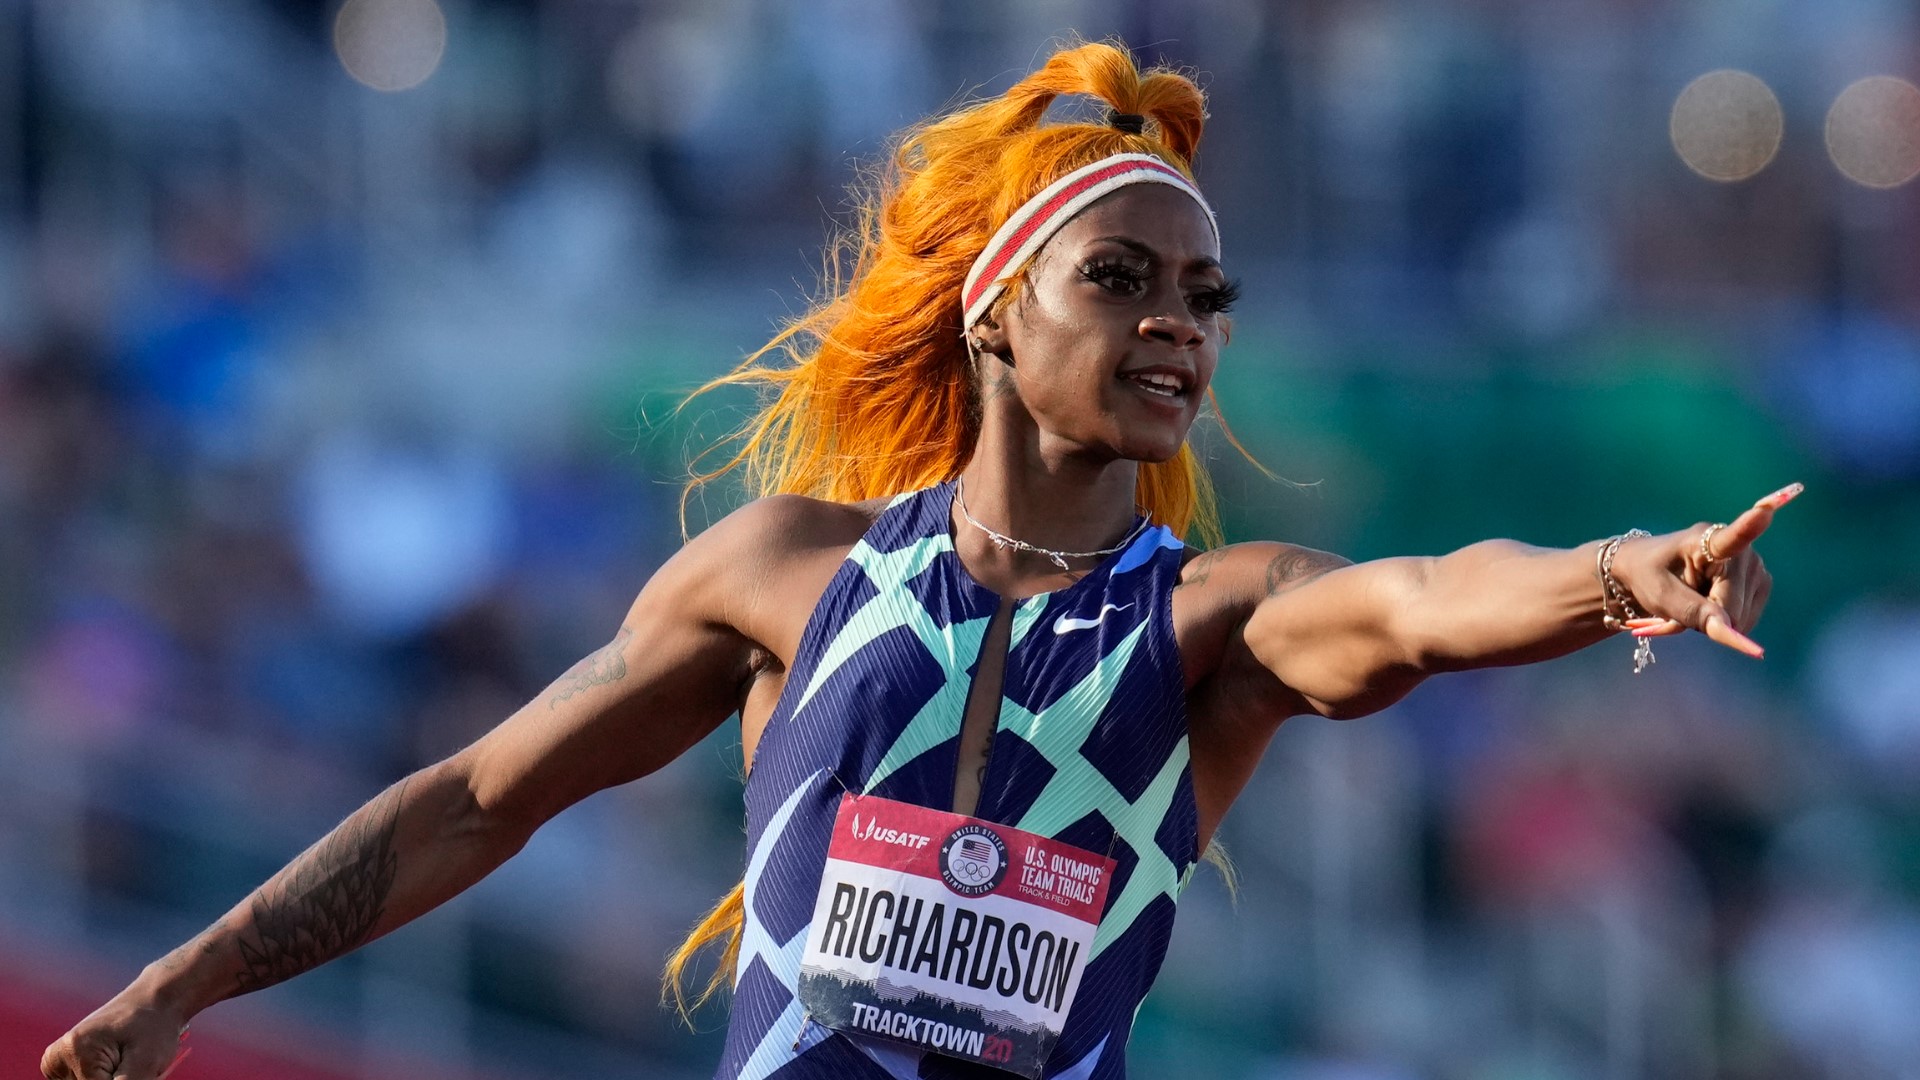 Sha'Carri Richardson won the women's 100-meters at the Olympic trials, but those results have reportedly been wiped out due to a positive drug test.